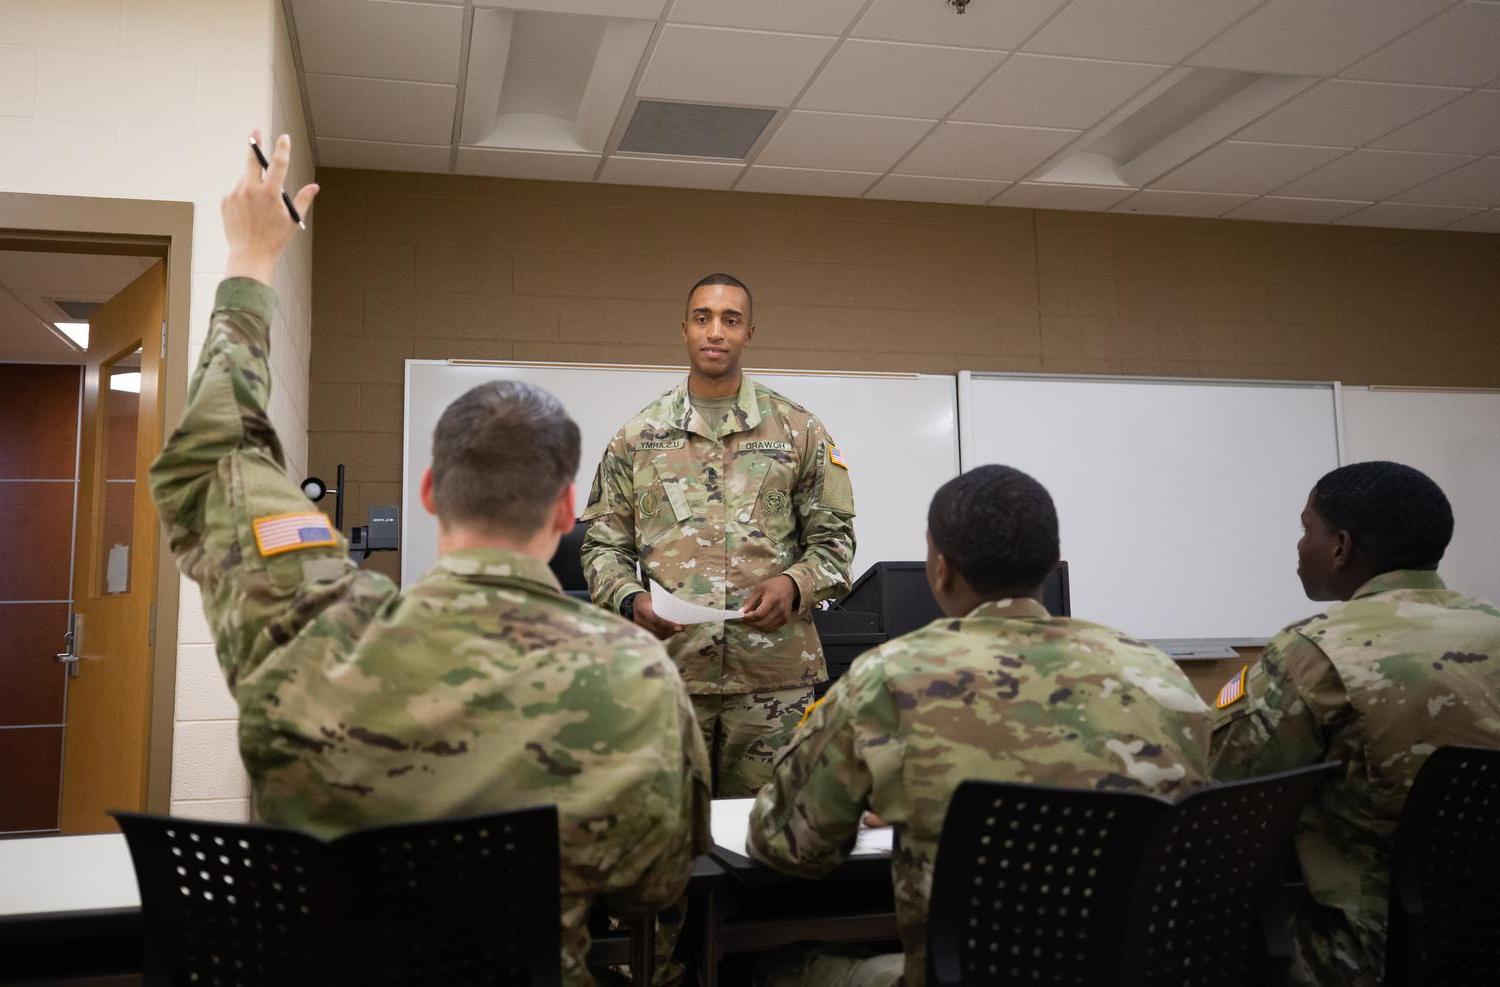 National Guard in Class at 365bet